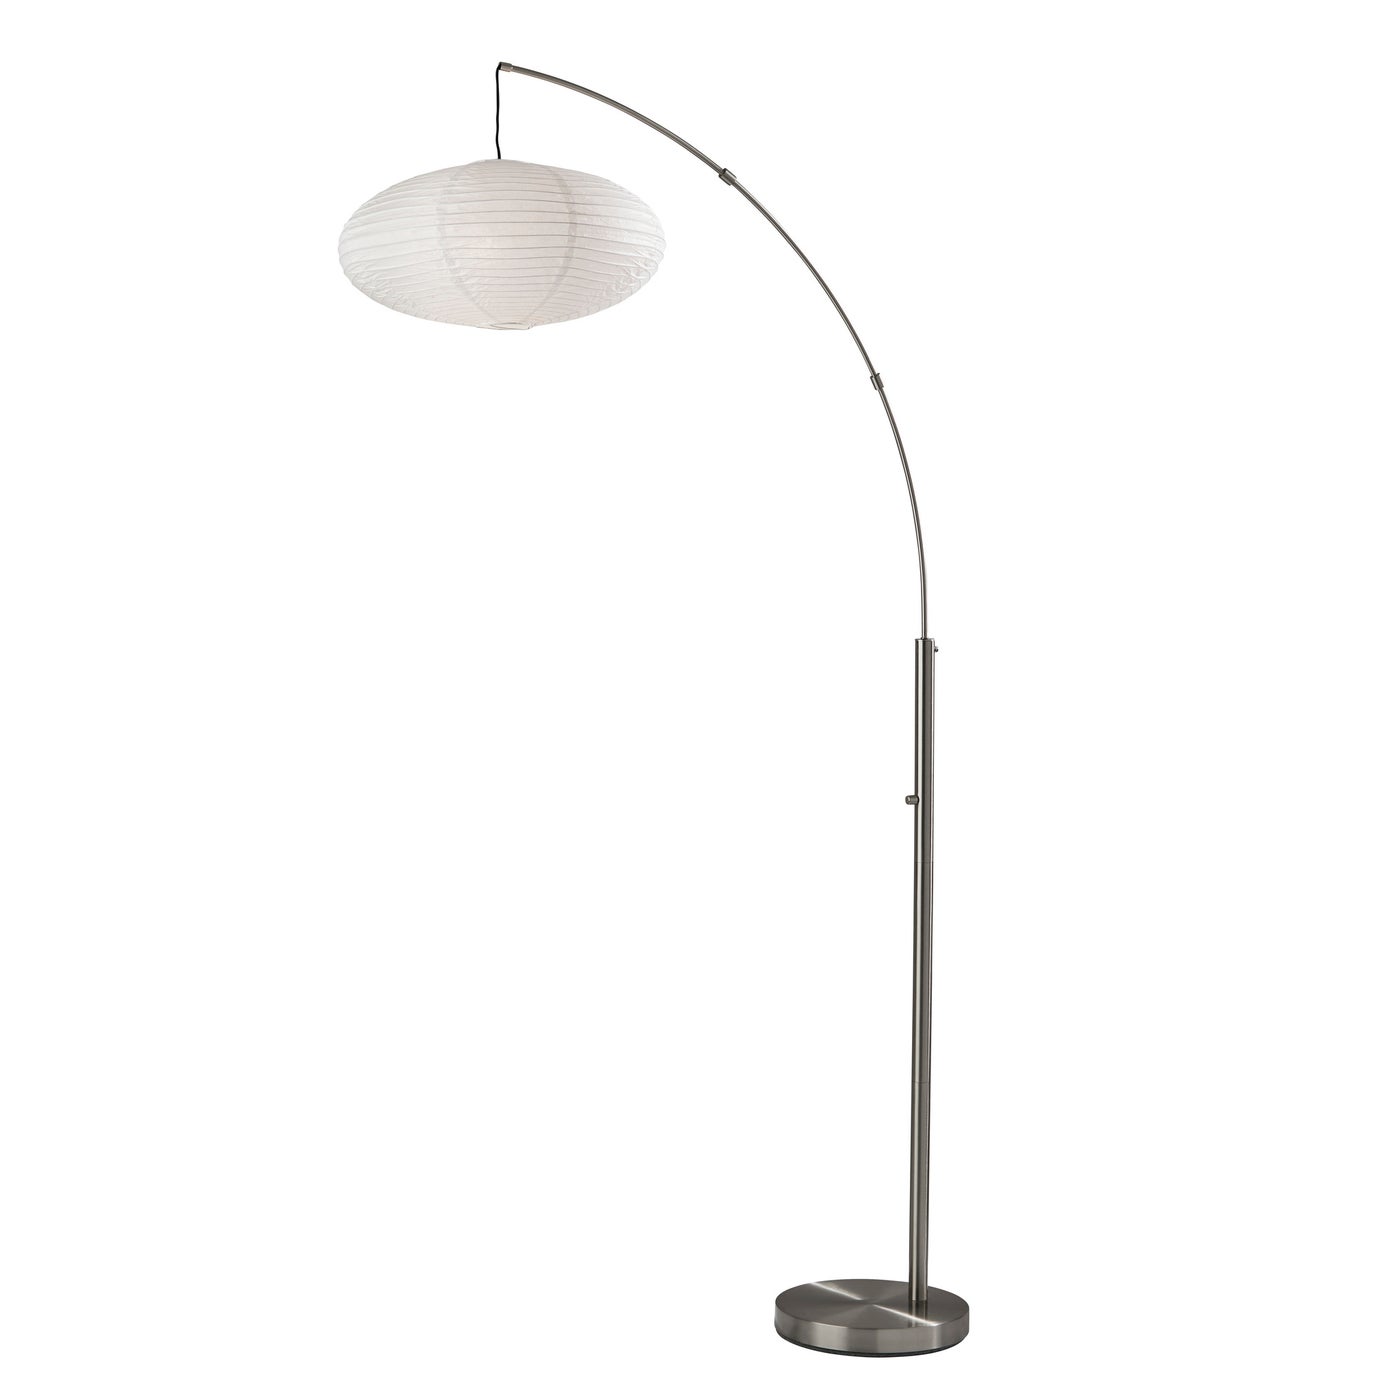 Adesso Home - 5024-22 - One Light Arc Lamp - Corinne - Brushed Steel